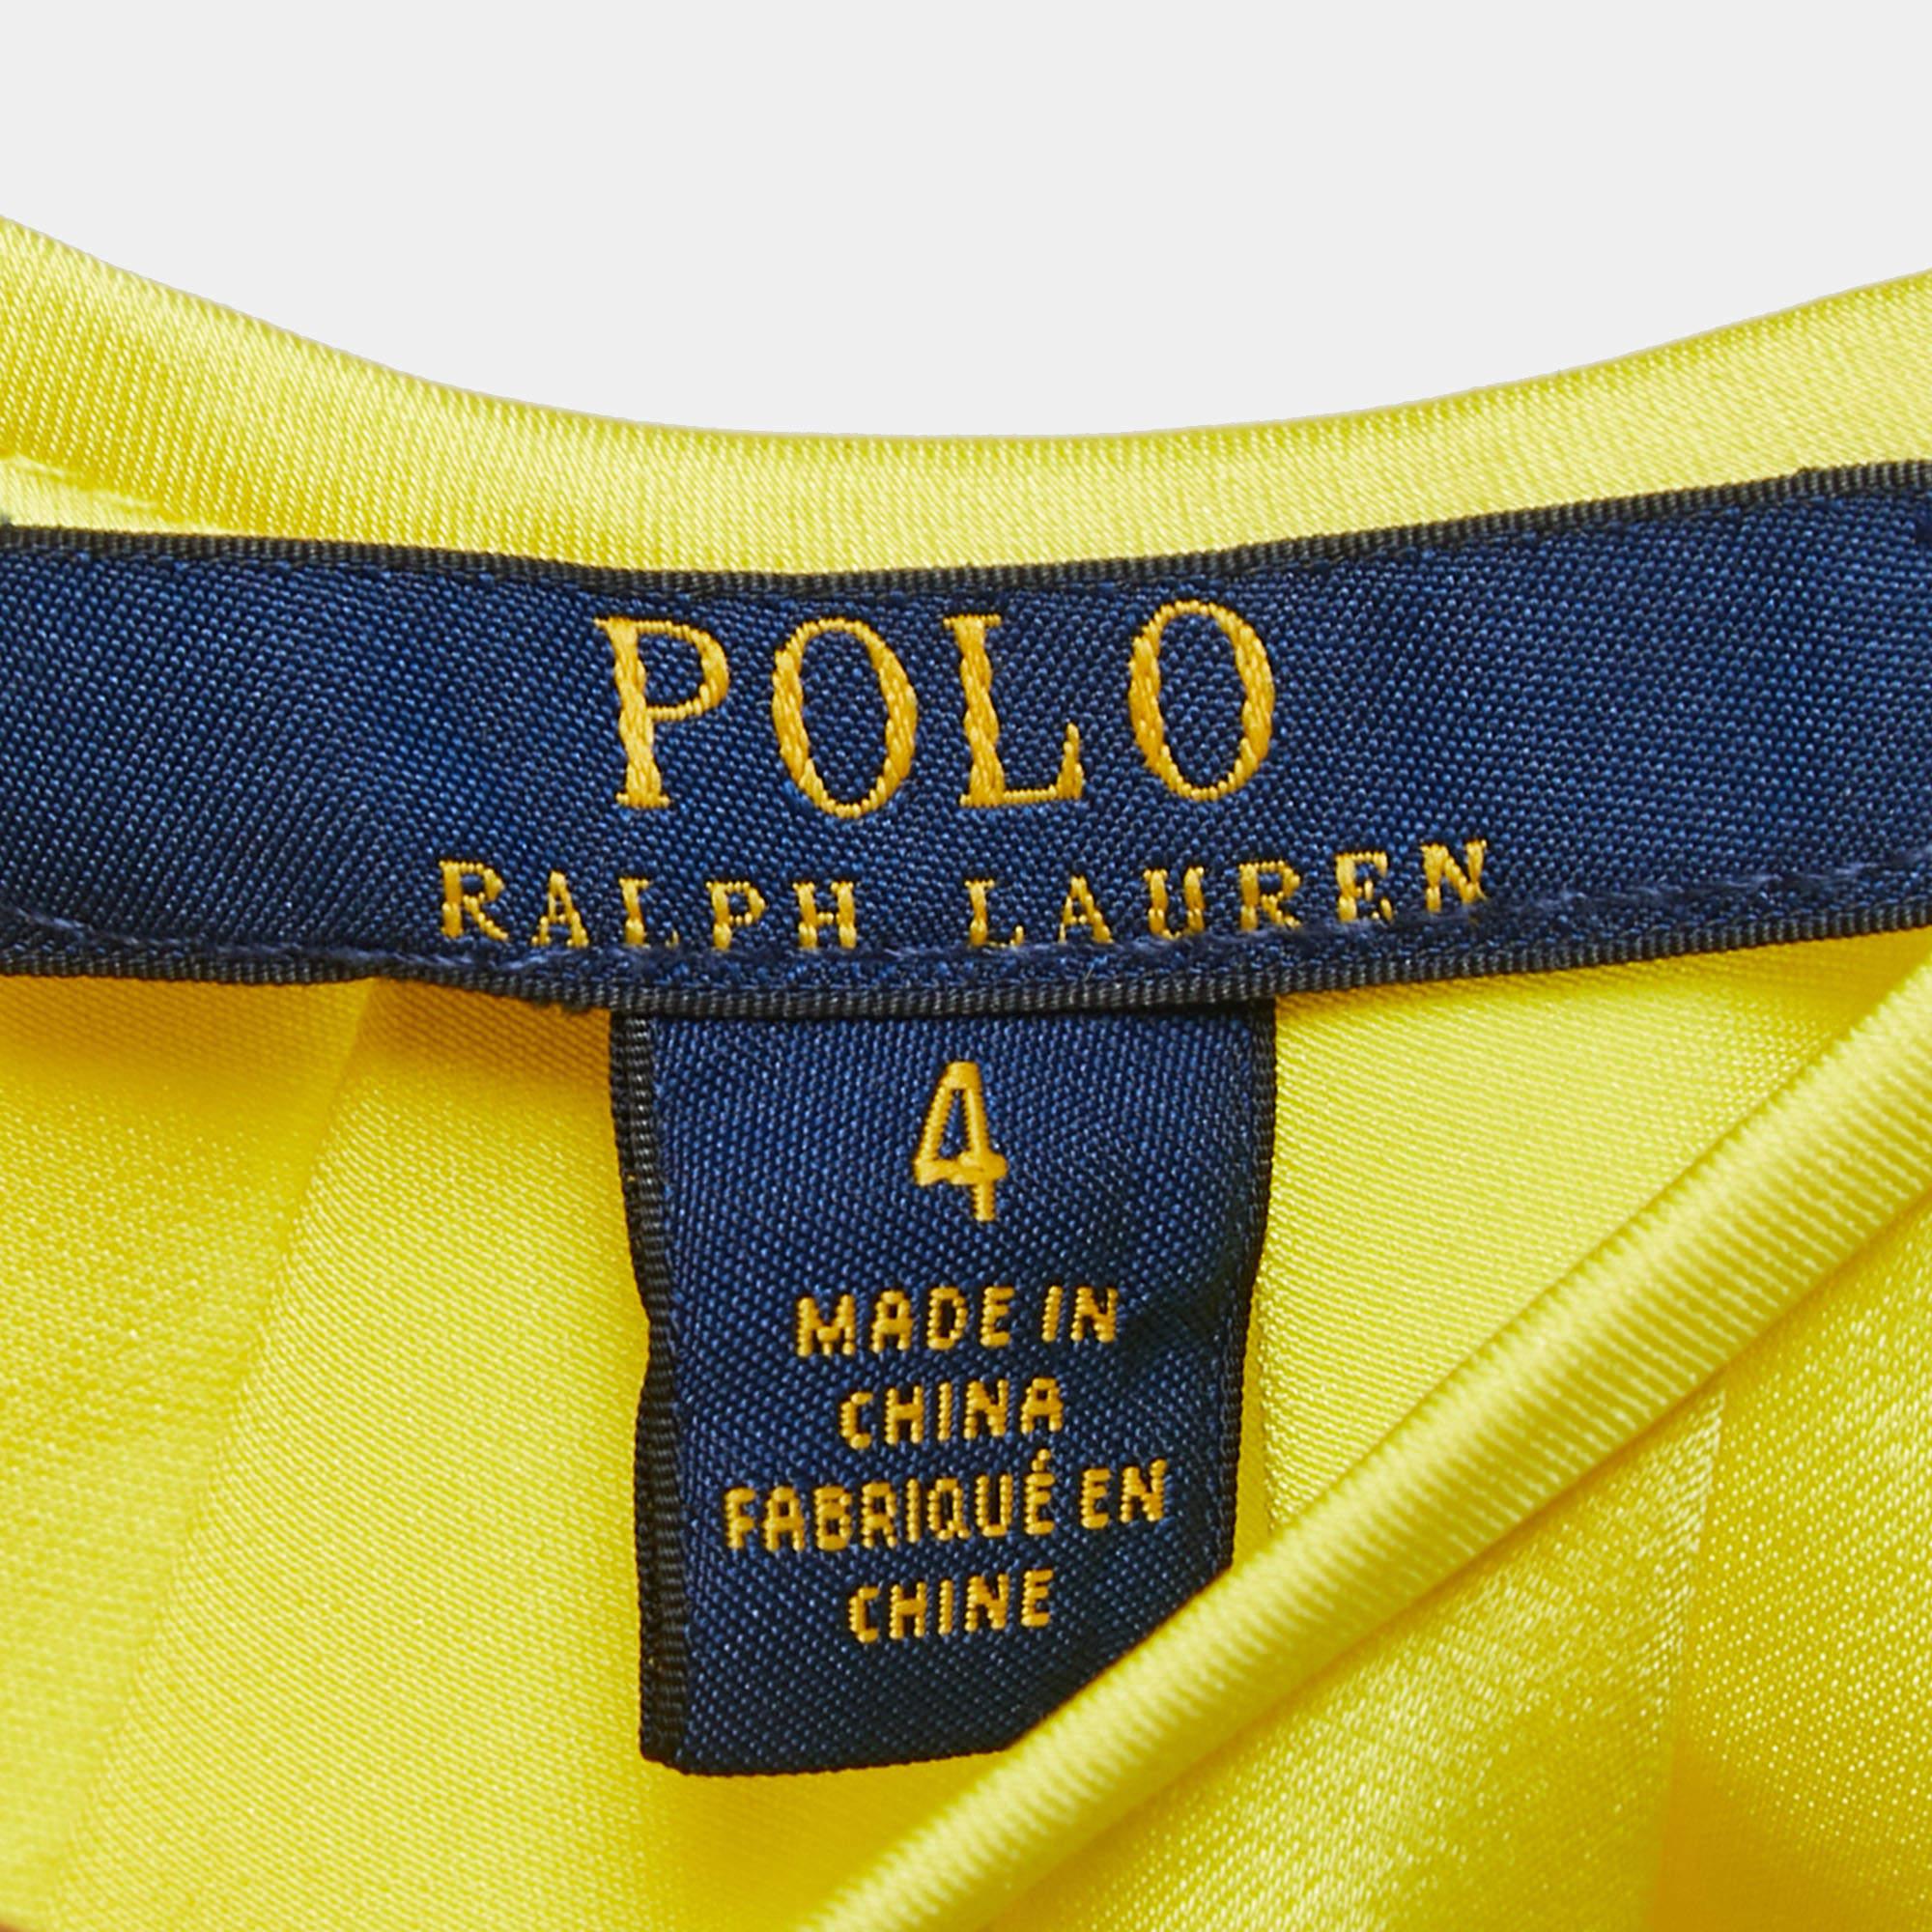 Polo Ralph Lauren Yellow Satin Pleated Back Slit Detailed Sleeveless Top S In Excellent Condition For Sale In Dubai, Al Qouz 2